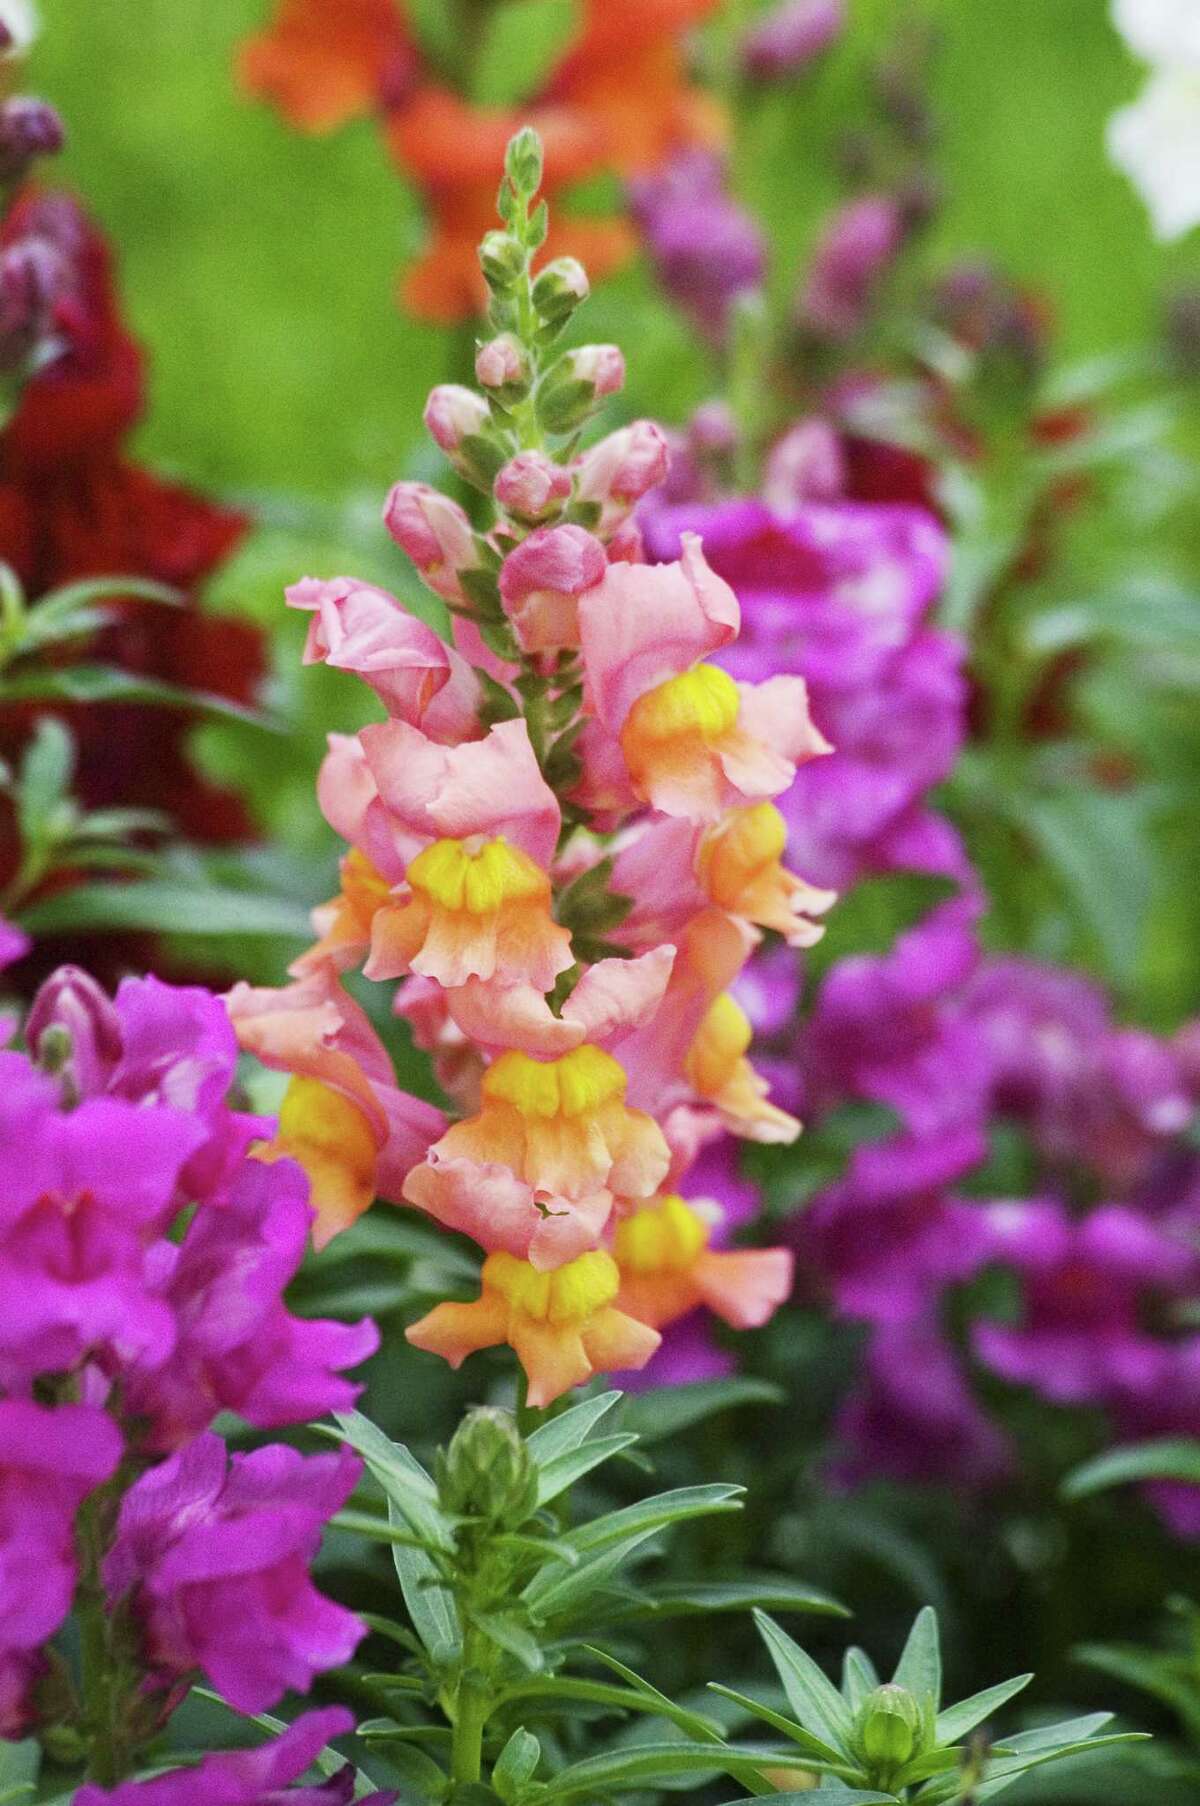 Snapdragons bloom in a range of colors and varying heights.